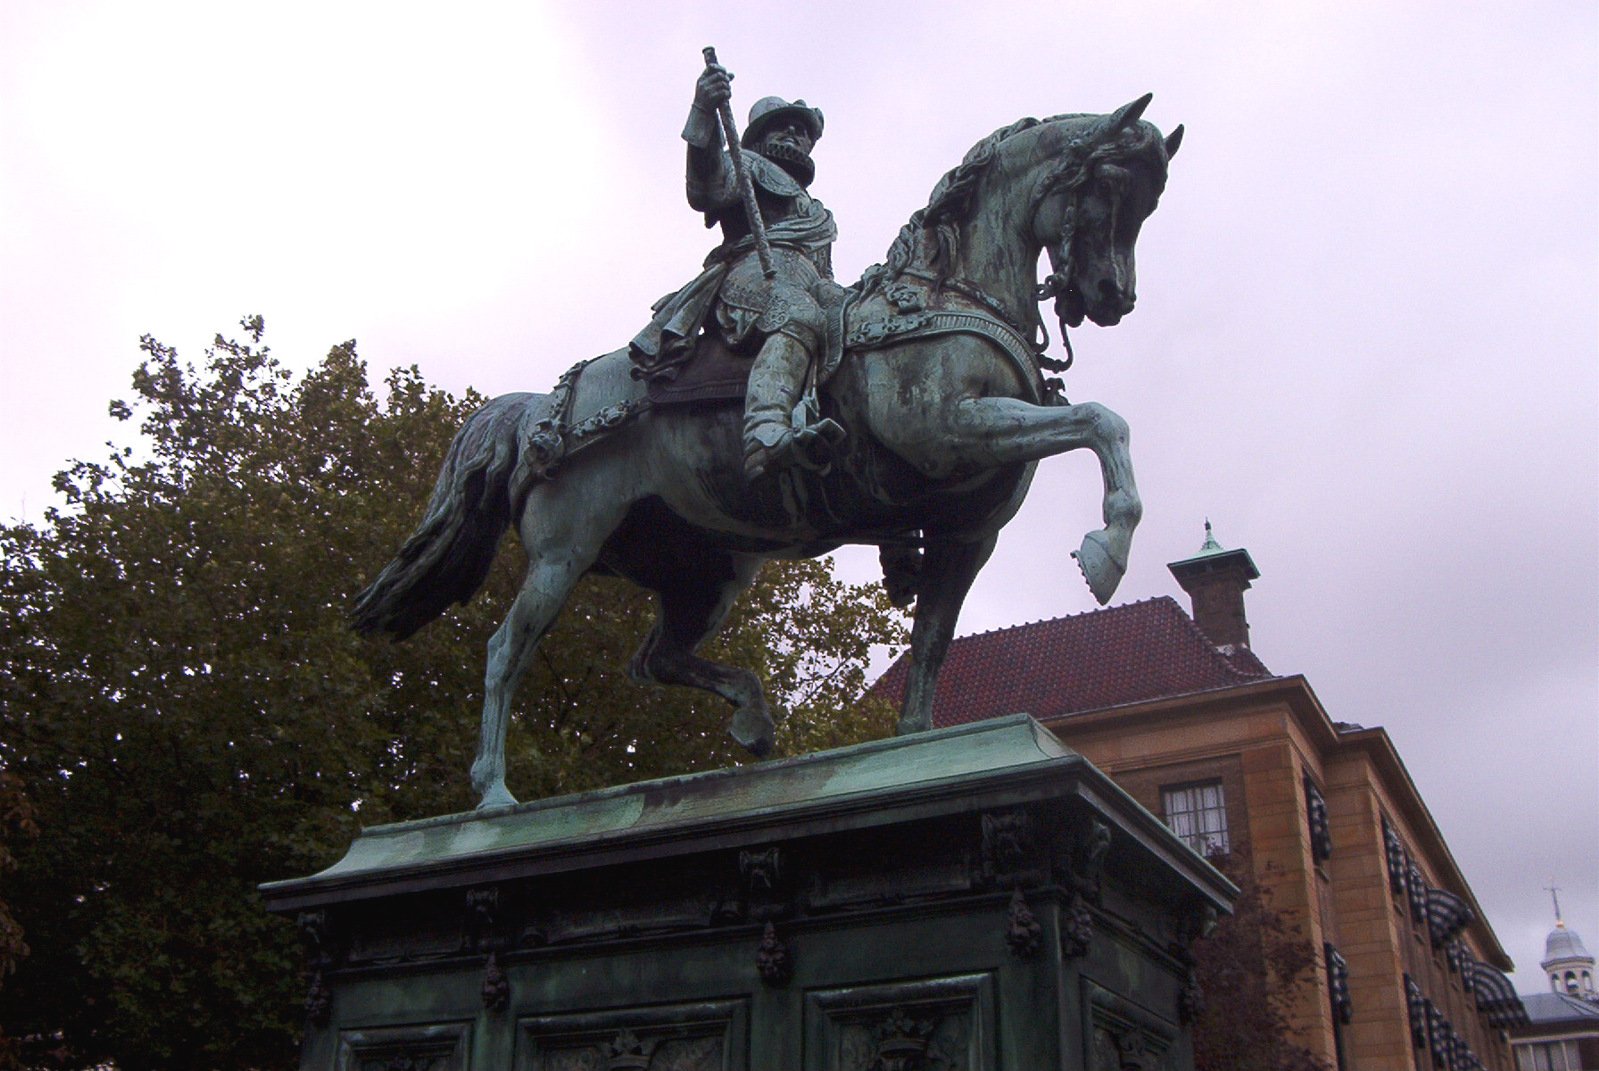 a statue of a man on horseback is located in front of a building